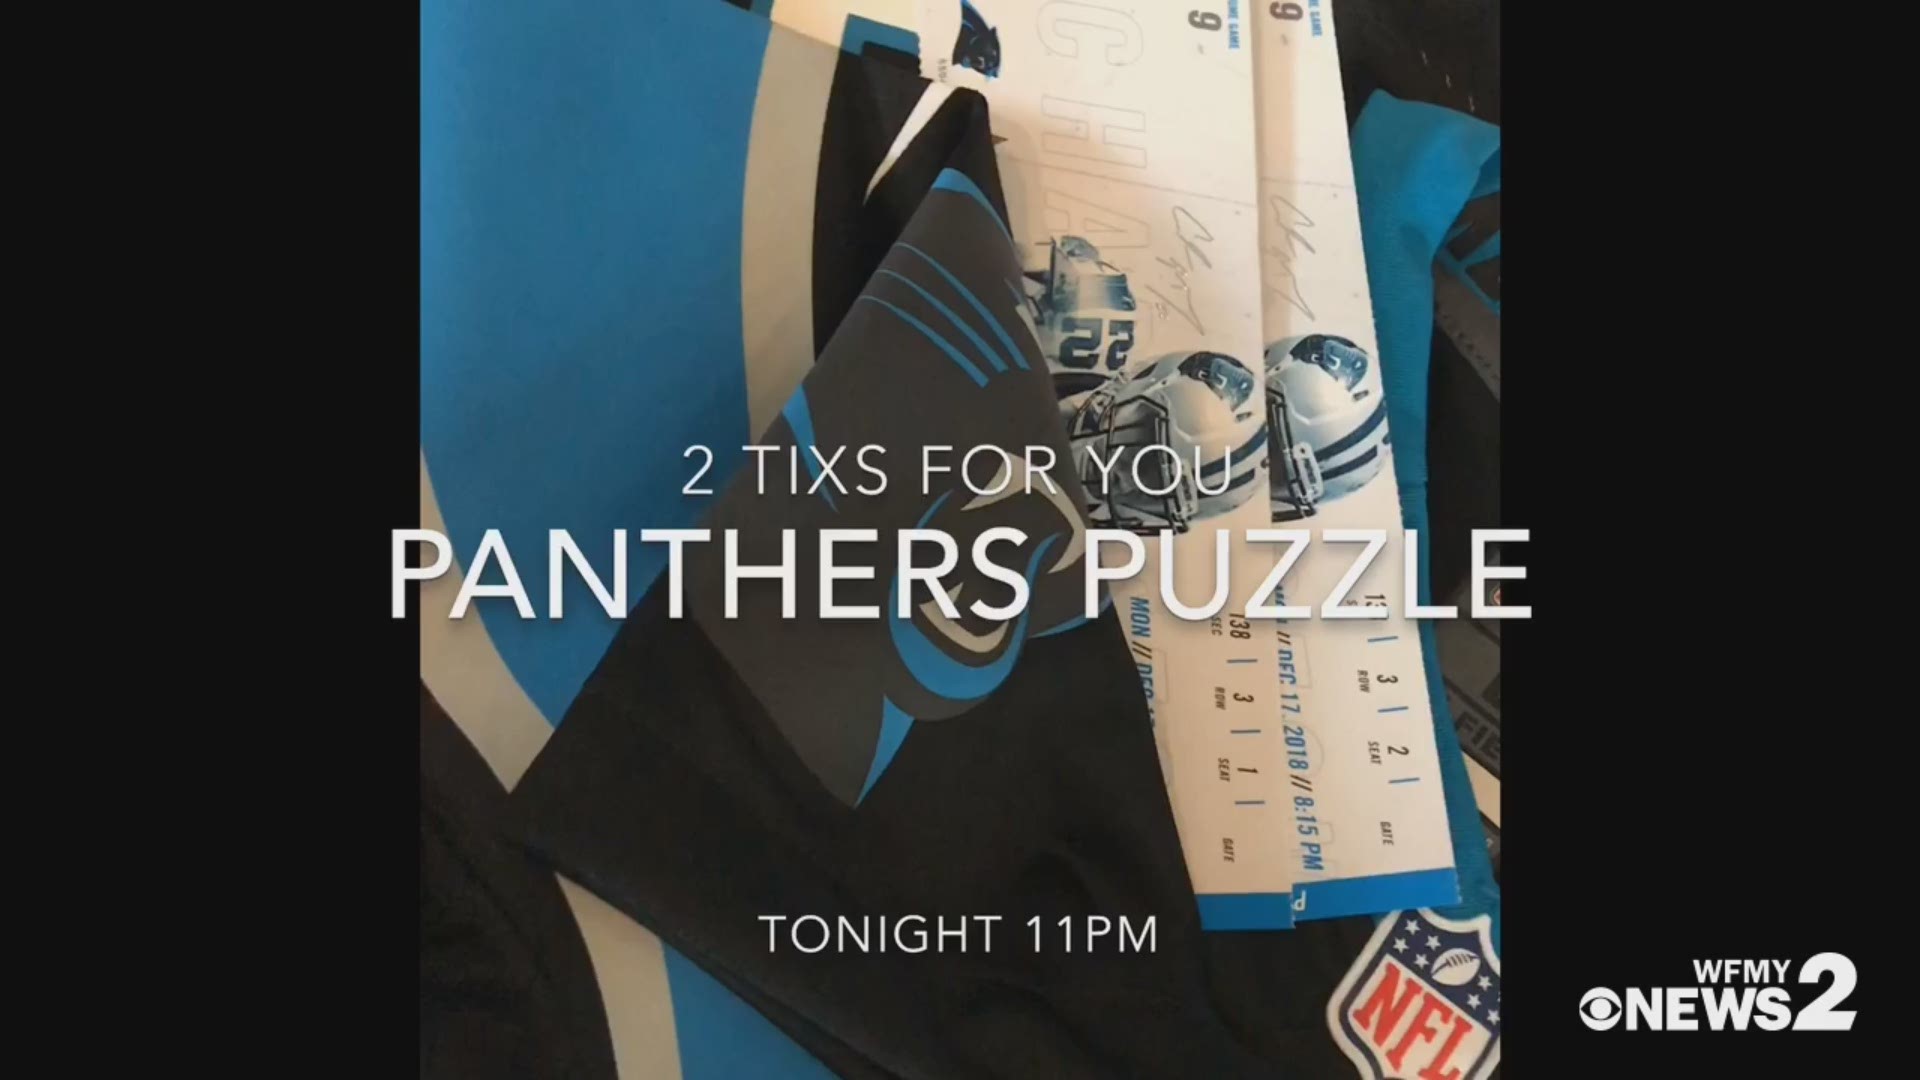 Two third row seats tickets up for grabs TONIGHT! You and a friend can be there when the Saints come marching in at Bank of America Stadium on December 17. Panthers Puzzle on WFMY News 2 - Home of the Carolina Panthers.